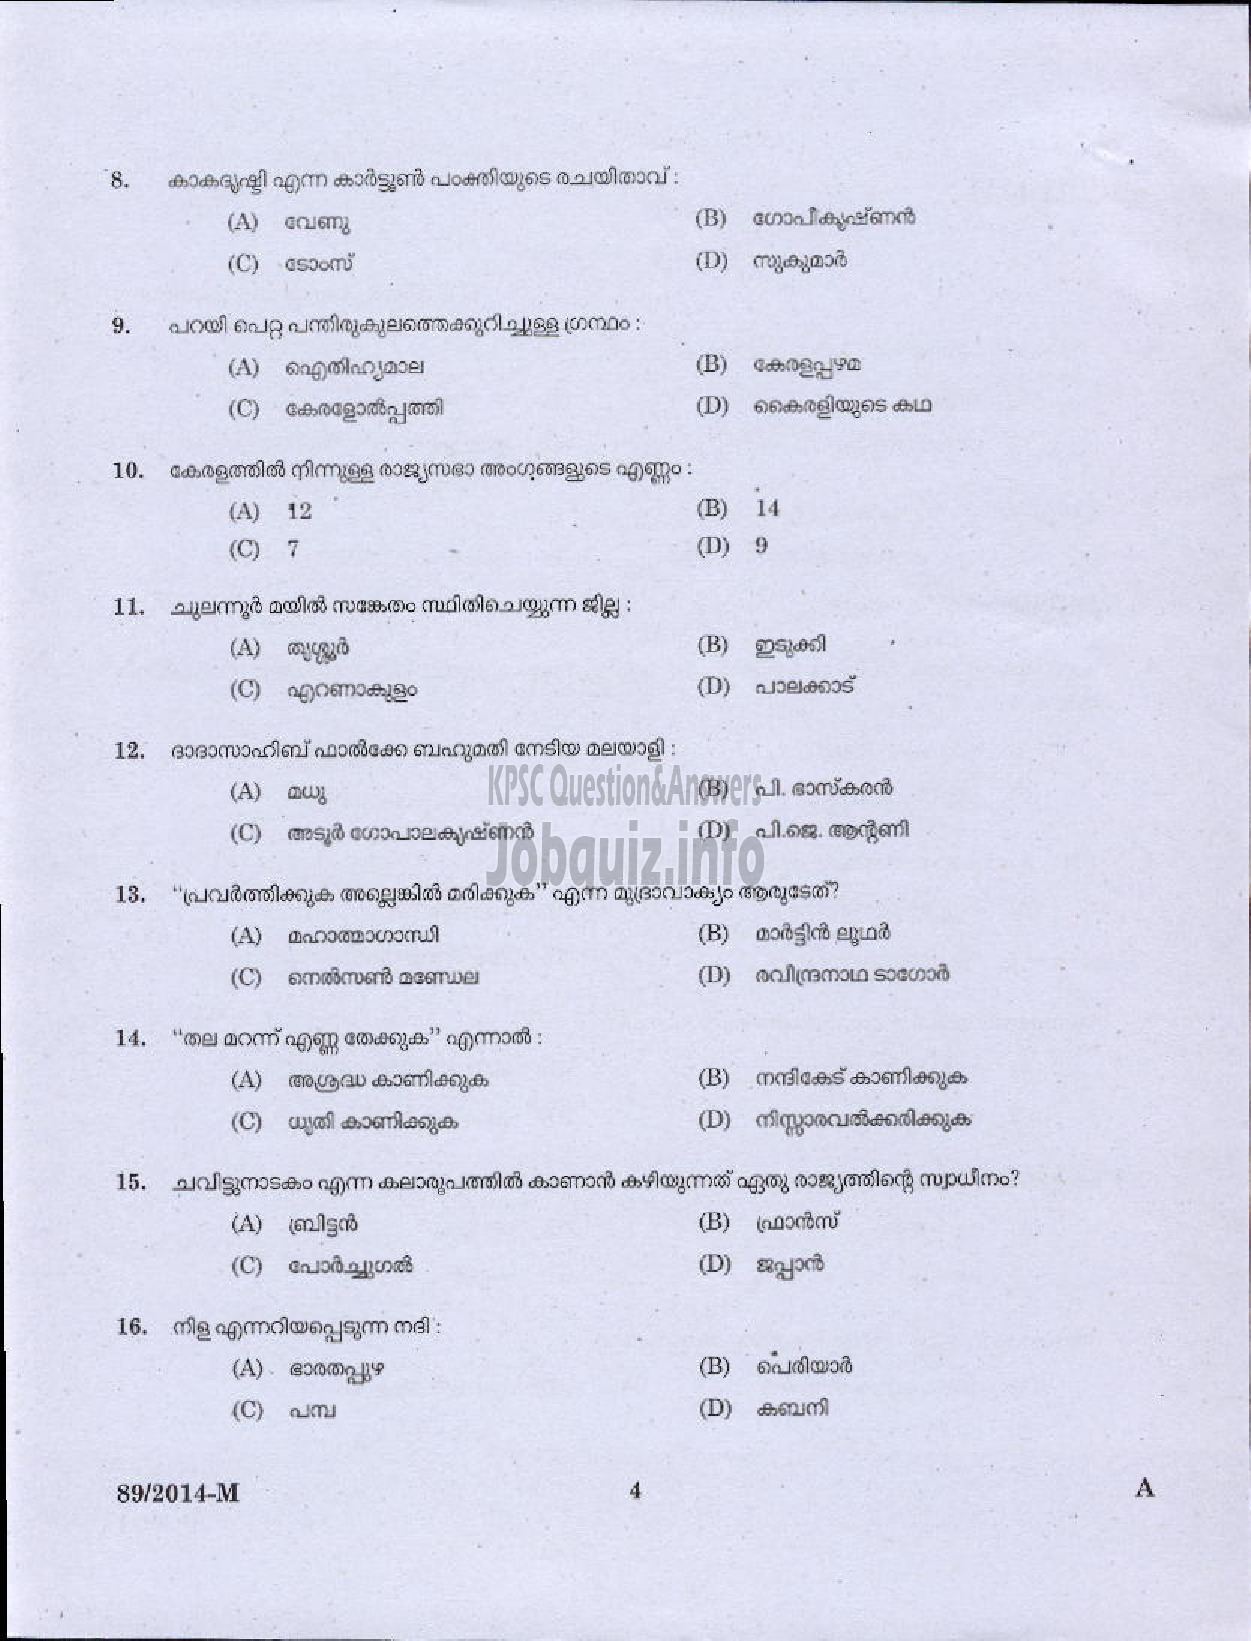 Kerala PSC Question Paper - ATTENDER SR FOR ST ONLY TCC LTD AND LGS NCA OBC VARIOUS KTYM ( Malayalam ) -2